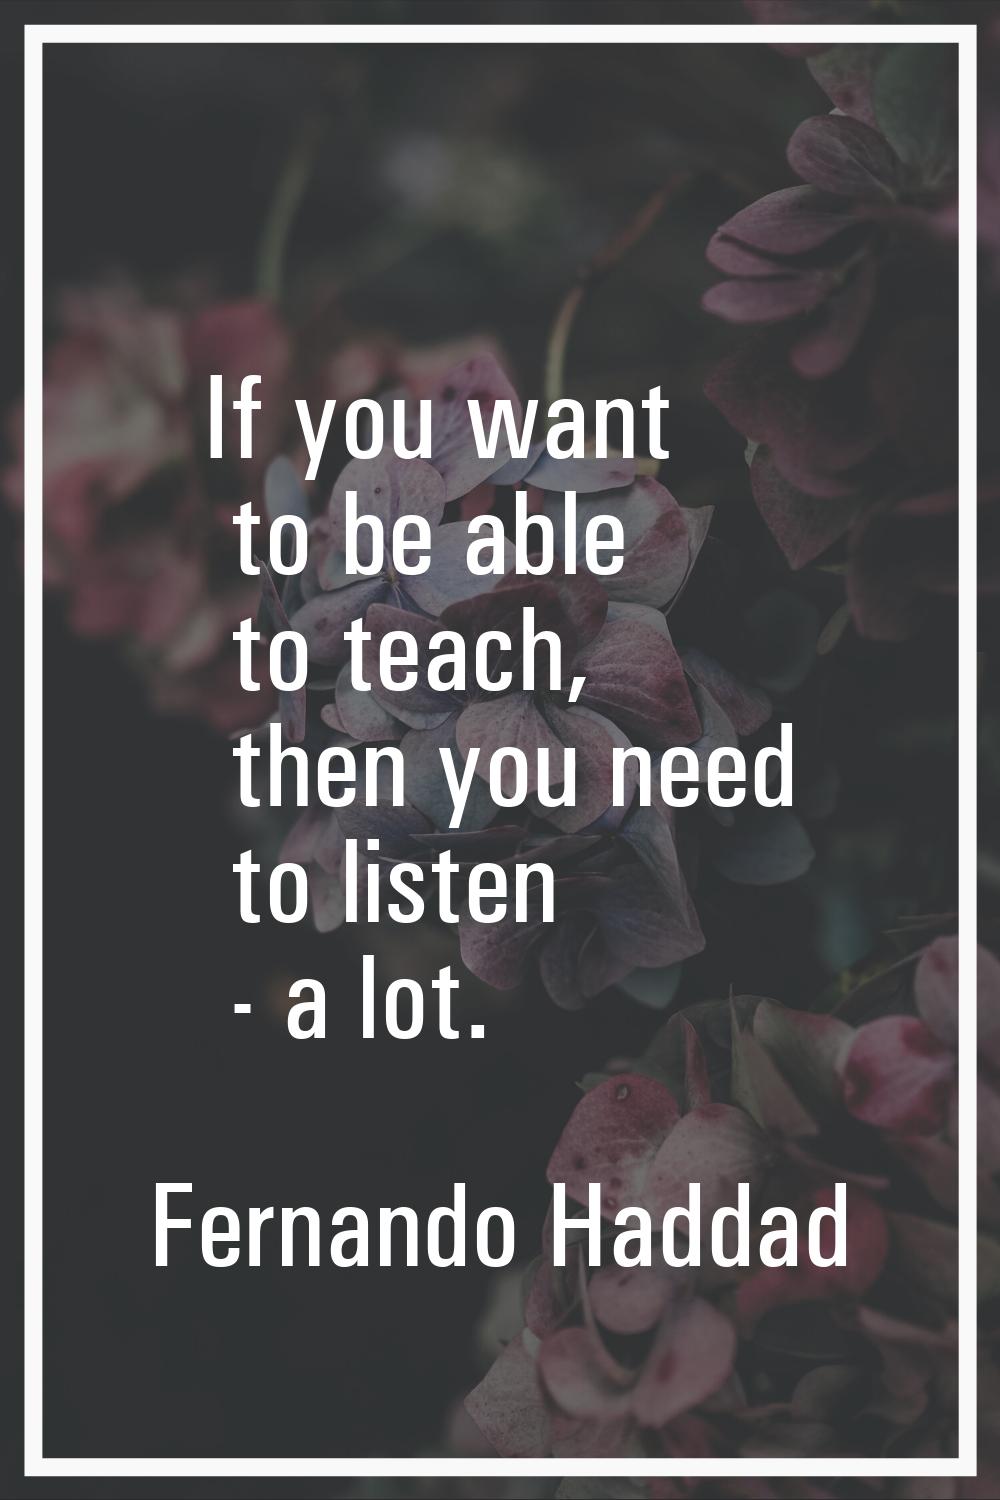 If you want to be able to teach, then you need to listen - a lot.